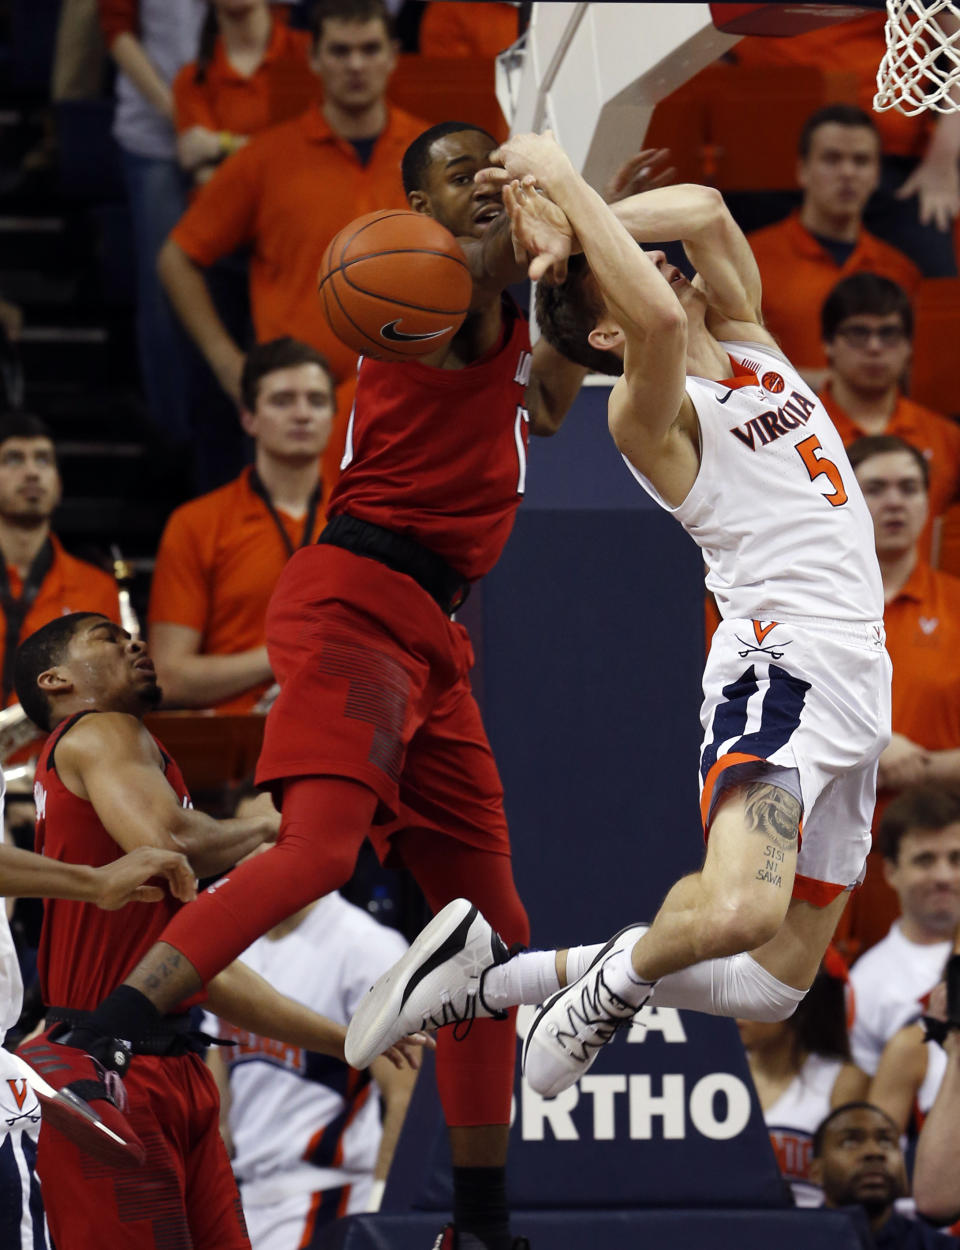 Louisville guard Christen Cunningham (1) strips the ball from Virginia guard Kyle Guy (5) during the first half of an NCAA college basketball game in Charlottesville, Va., Saturday, March 9, 2019. (AP Photo/Steve Helber)